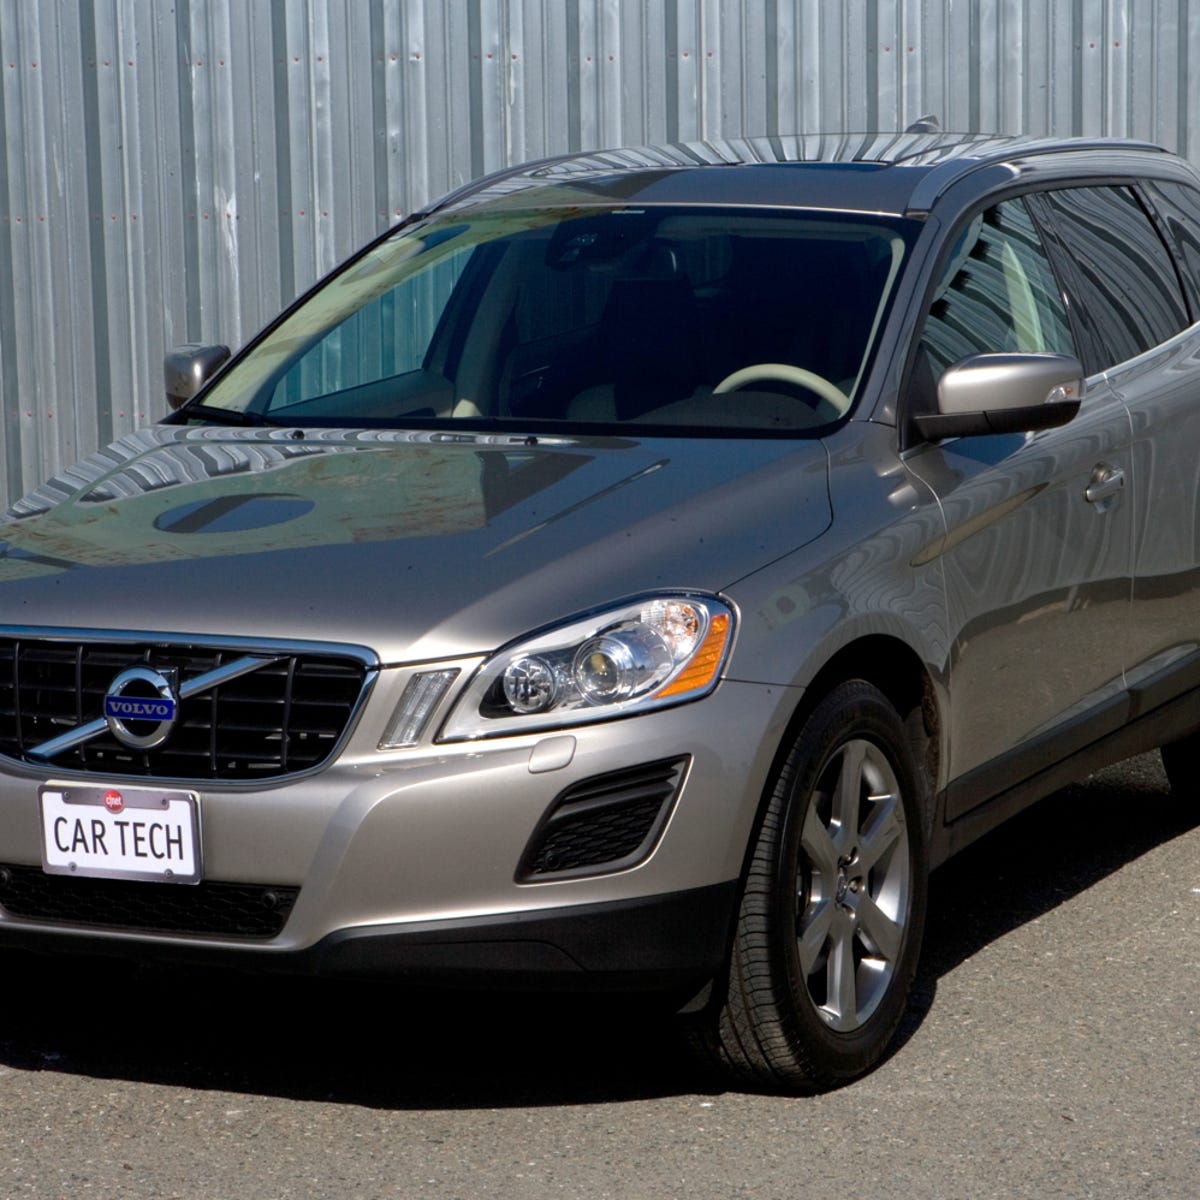 2013 Volvo XC60 review: Collision prevention comes standard - CNET